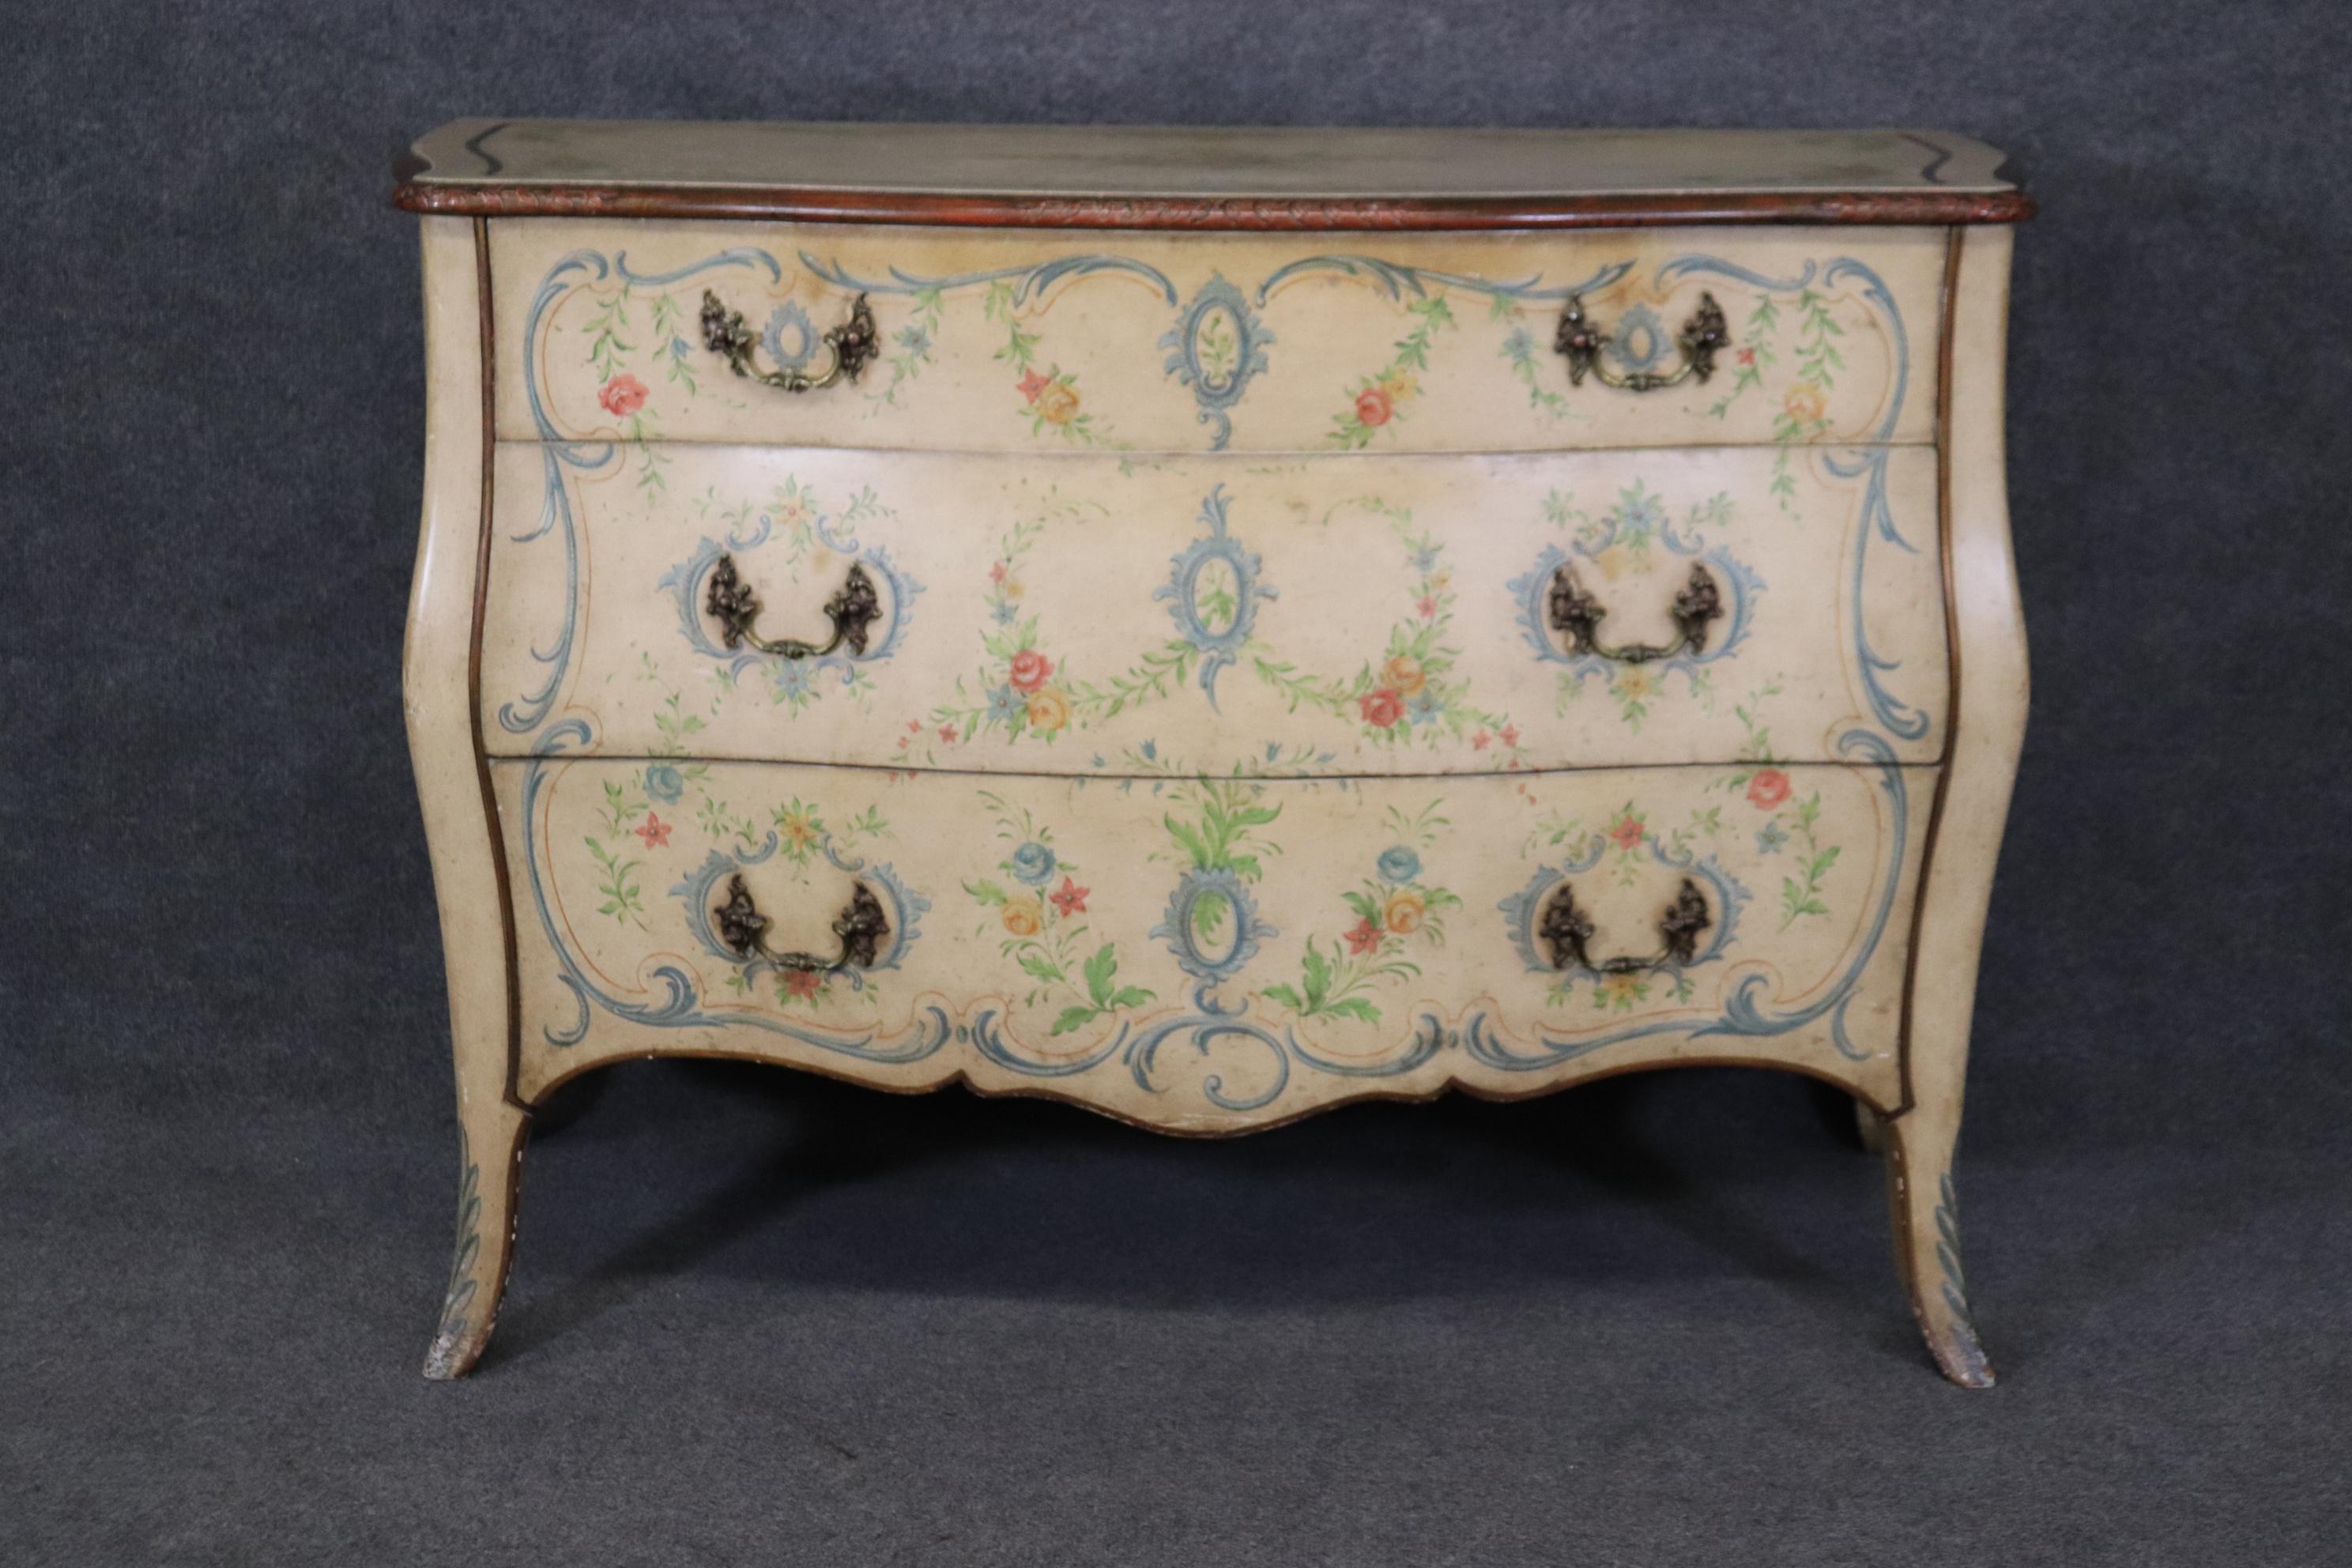 This is a superbly painted and crafted Italian-made Venetian decorated commode or dresser. The dresser features some of the finest paint decorating we've seen in a long time. The edge of the top is carved which is an unusual touch for these kinds of